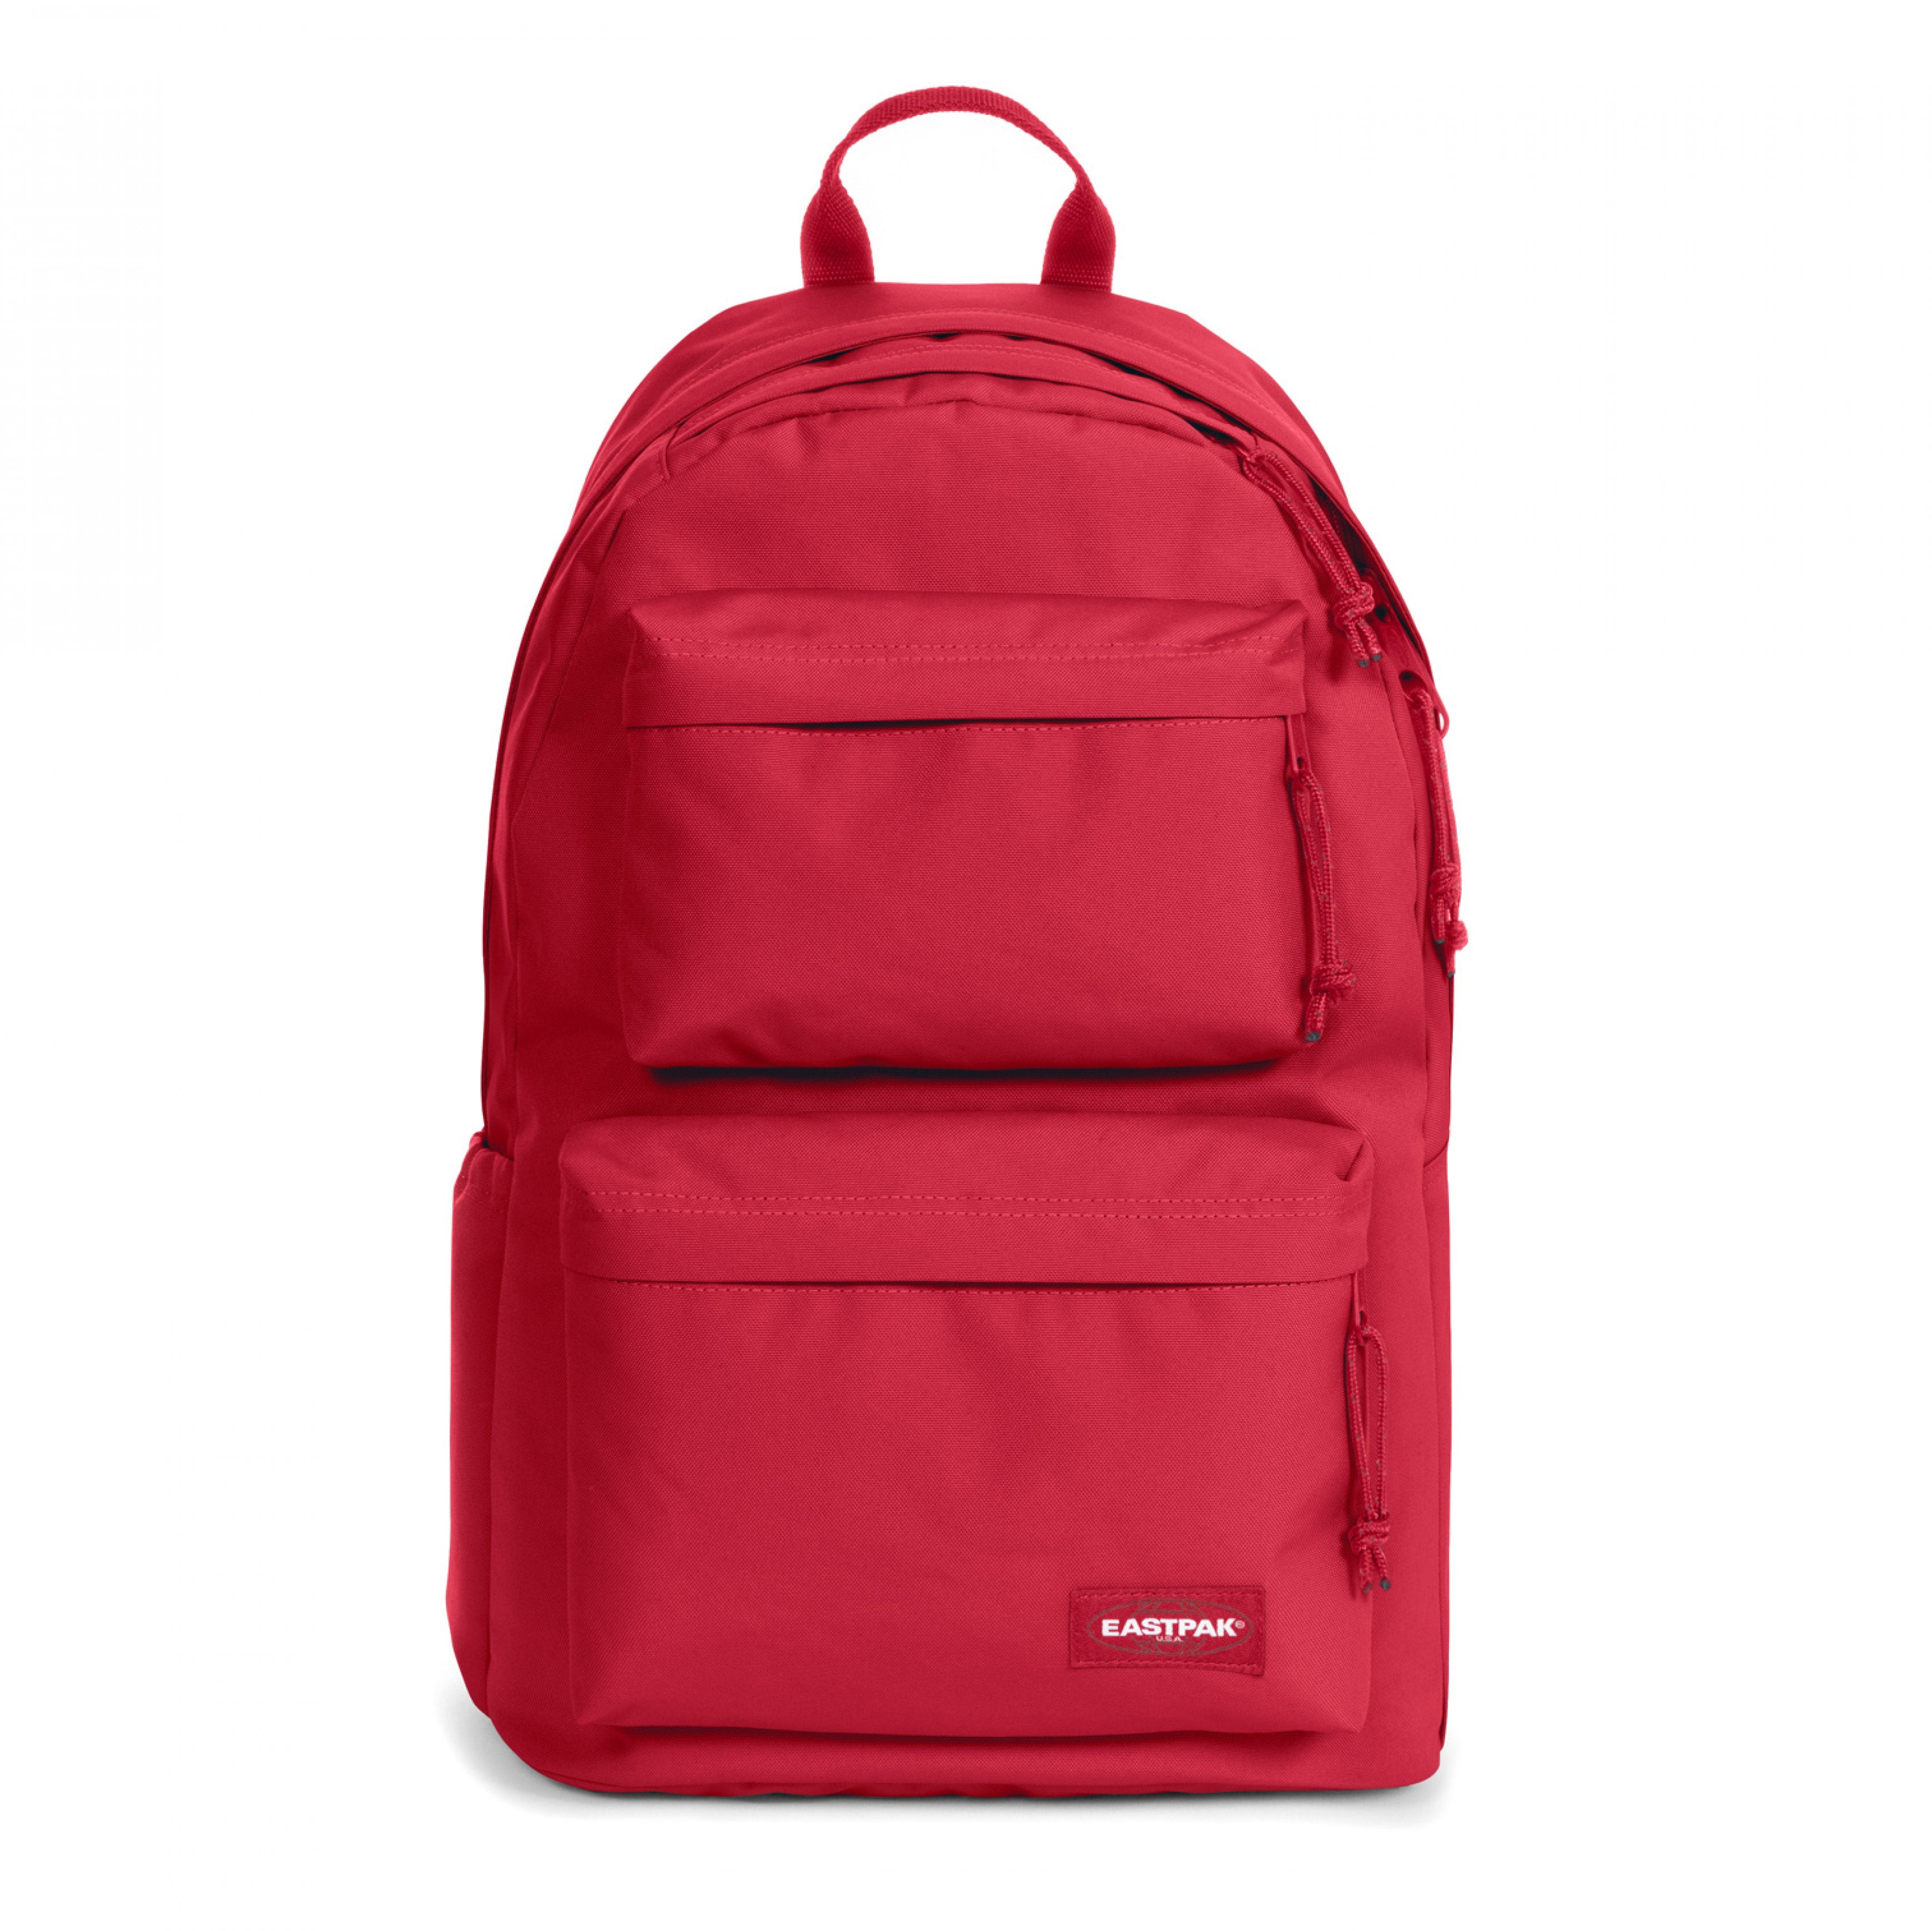 Padded Double Sailor Red Backpack